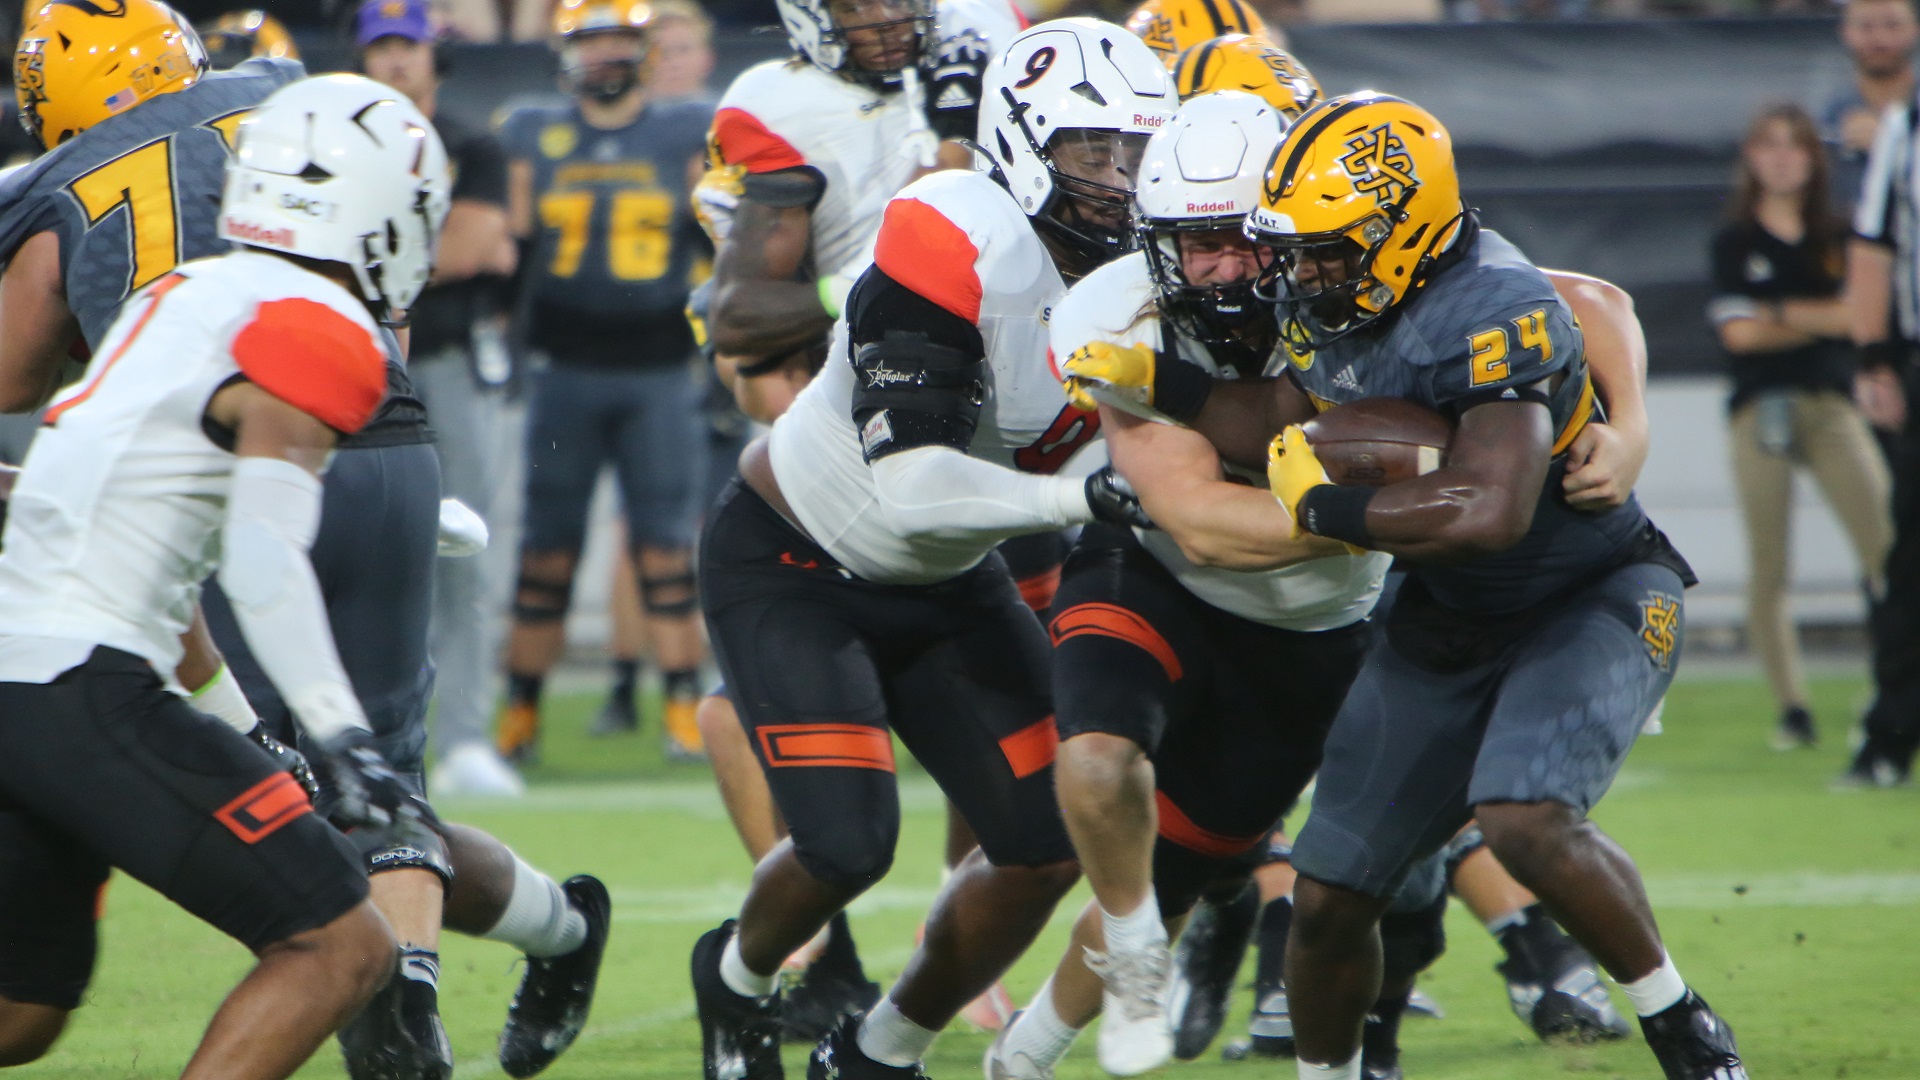 The Pioneer defense held Kennesaw State running backs to 75 yards on the ground (photo by TU Athletic Communications)